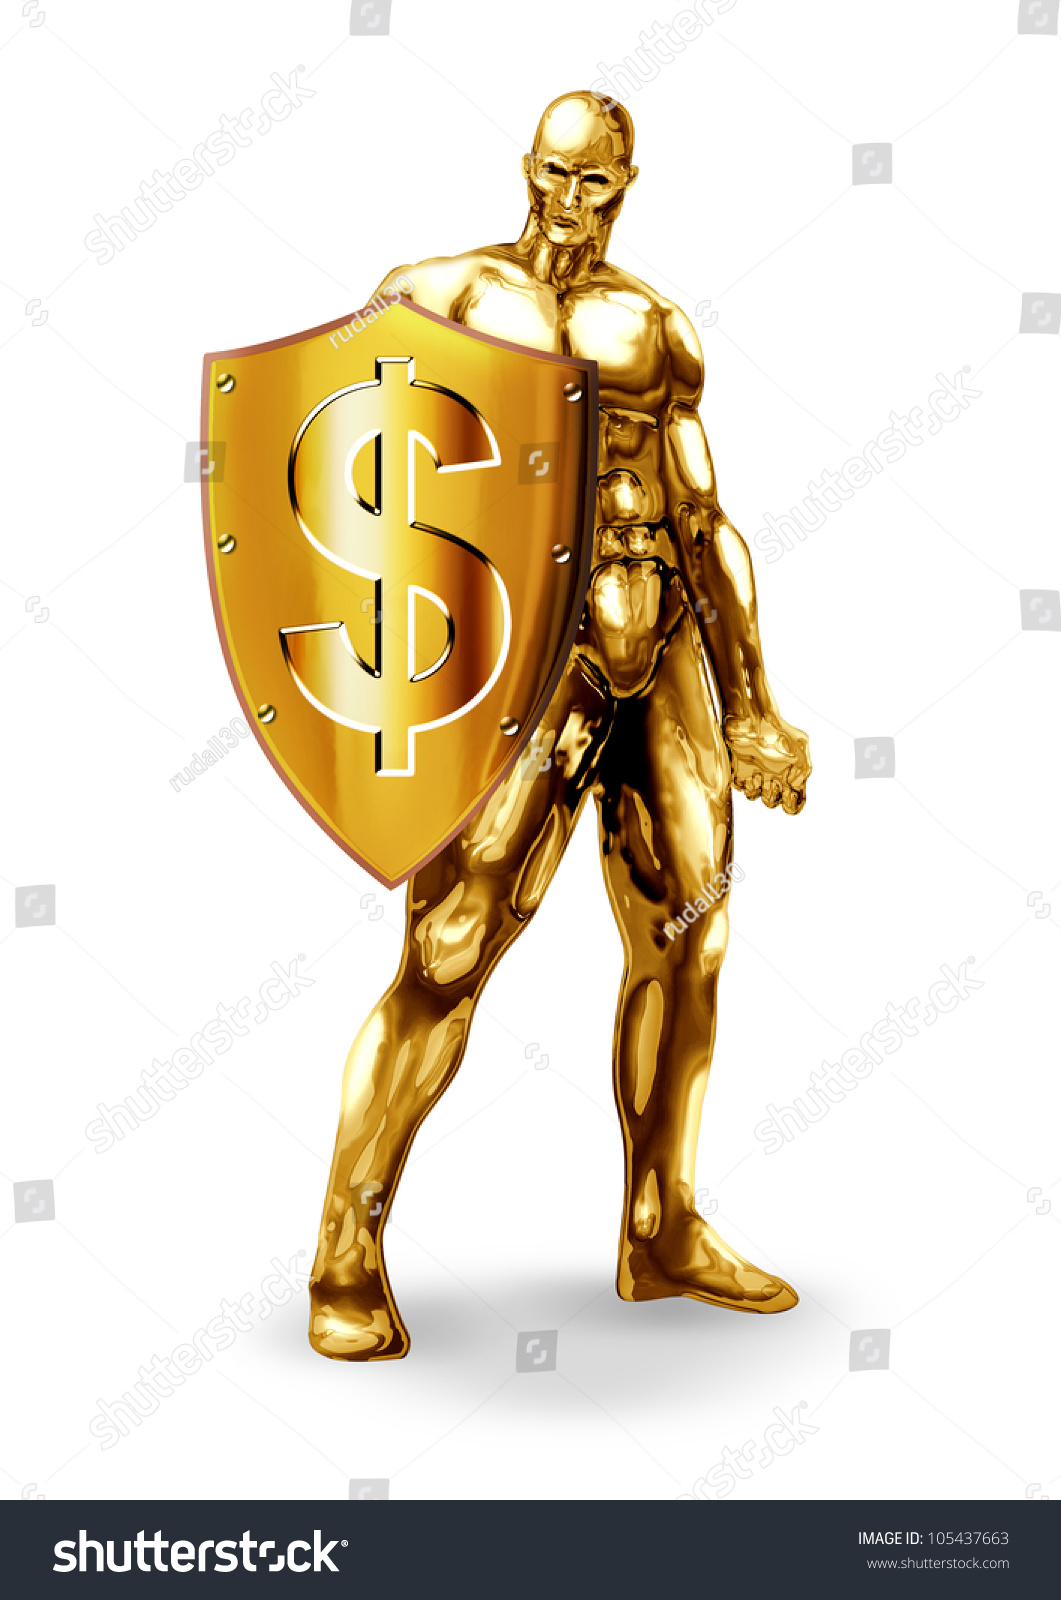 stock-photo-illustration-of-a-gold-man-holding-a-shield-with-dollar-symbol-105437663.jpg